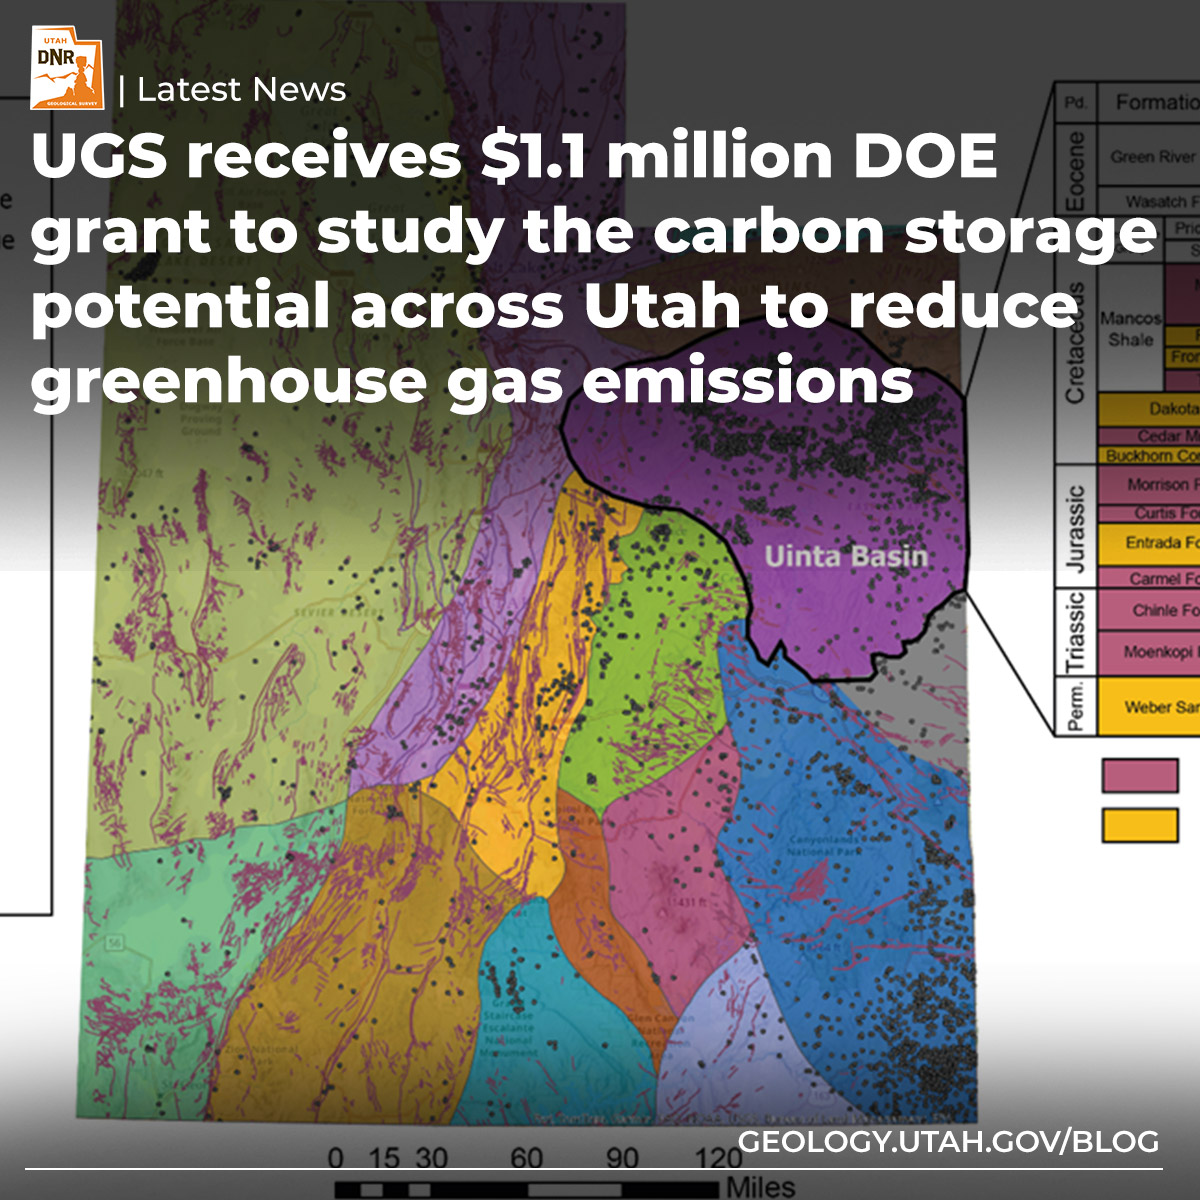 The Utah Geological Survey has received a $1.1M grant from the DOE to study the state's potential for geologic carbon storage, aiming to reduce greenhouse gas emissions. Learn more here–ow.ly/j8I750RzFve #energynews #utahgeology